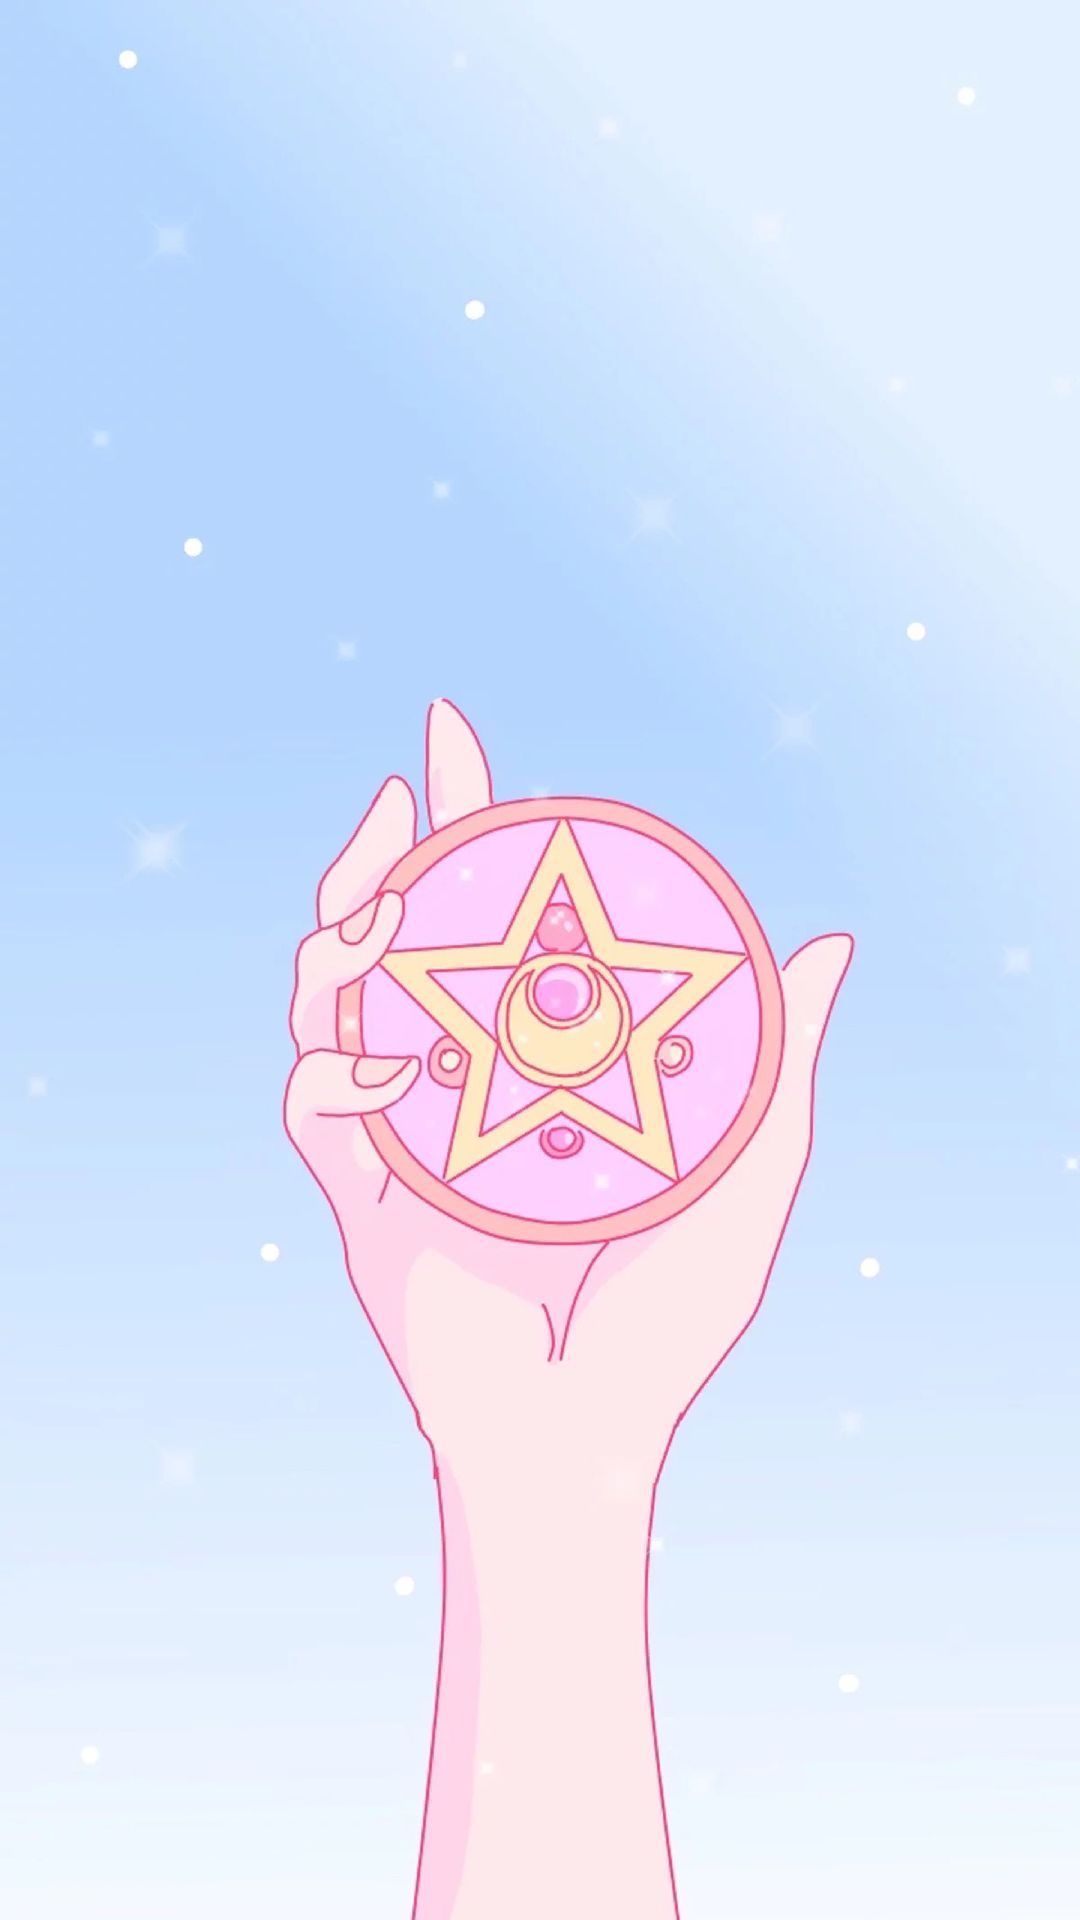 15 Selected wallpaper aesthetic sailor moon You Can Use It At No Cost ...